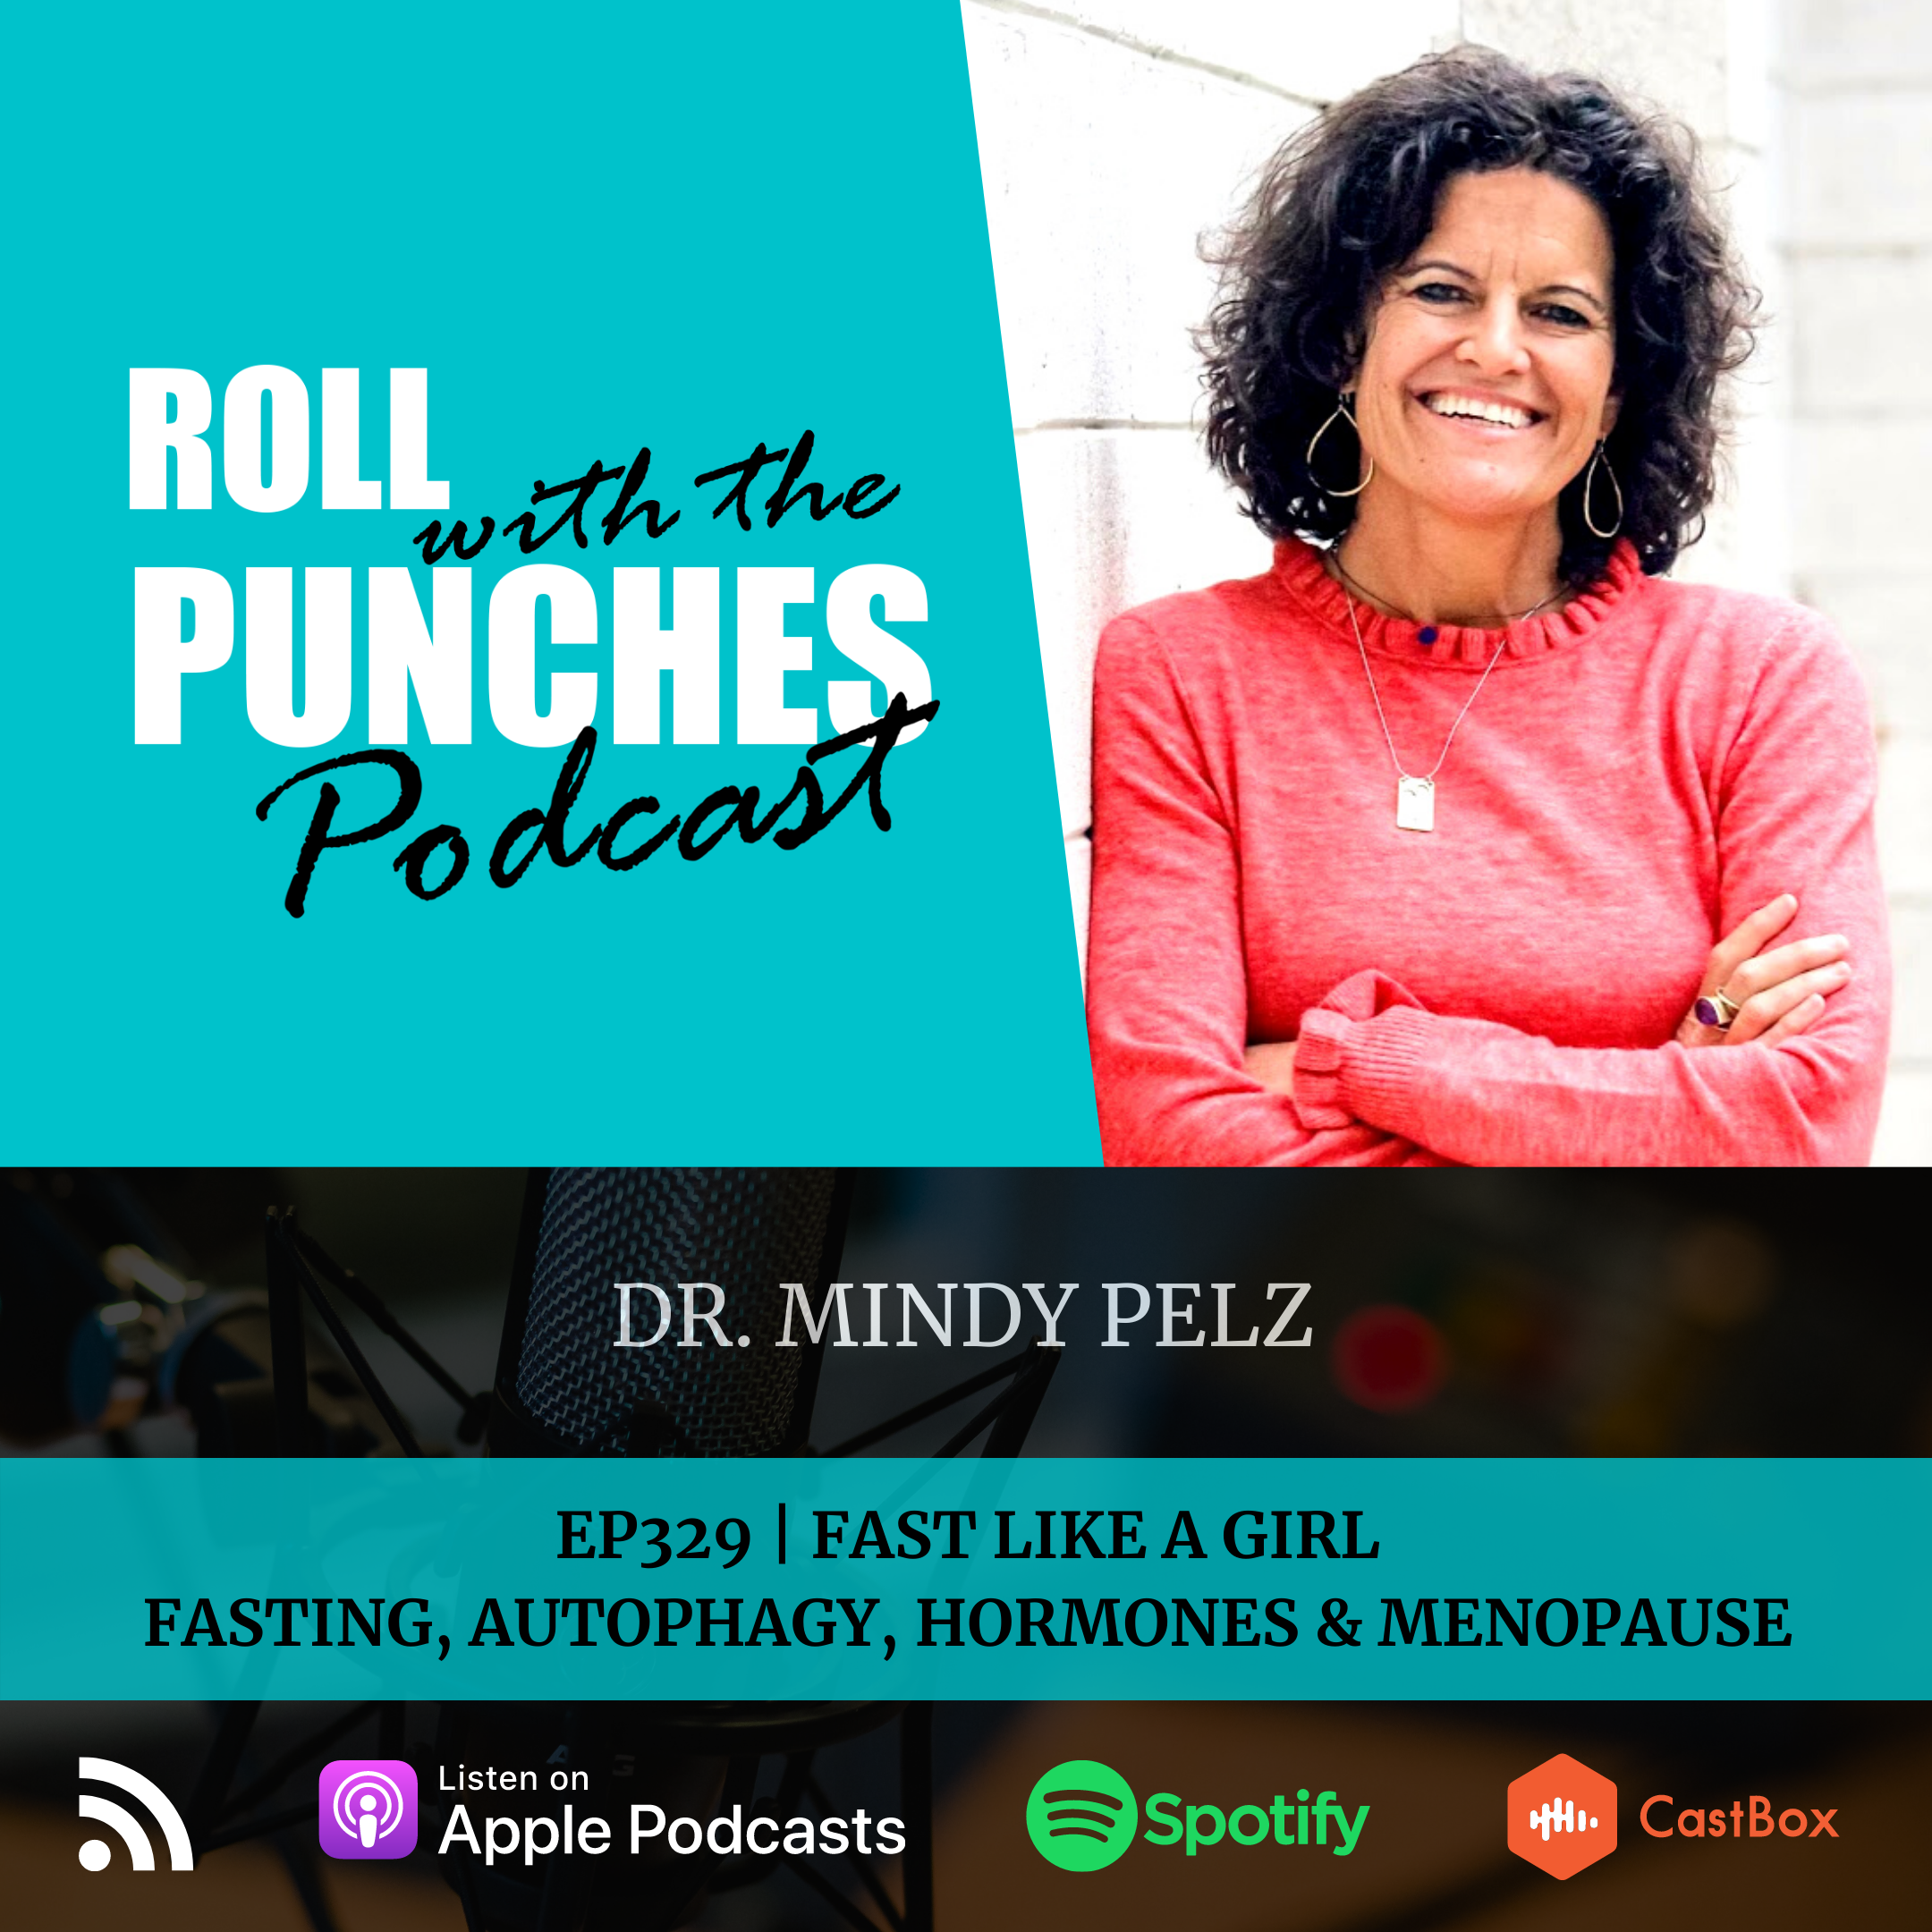 Fast Like A Girl. Fasting, Autophagy, Hormones & Menopause | Dr Mindy Pelz - 329